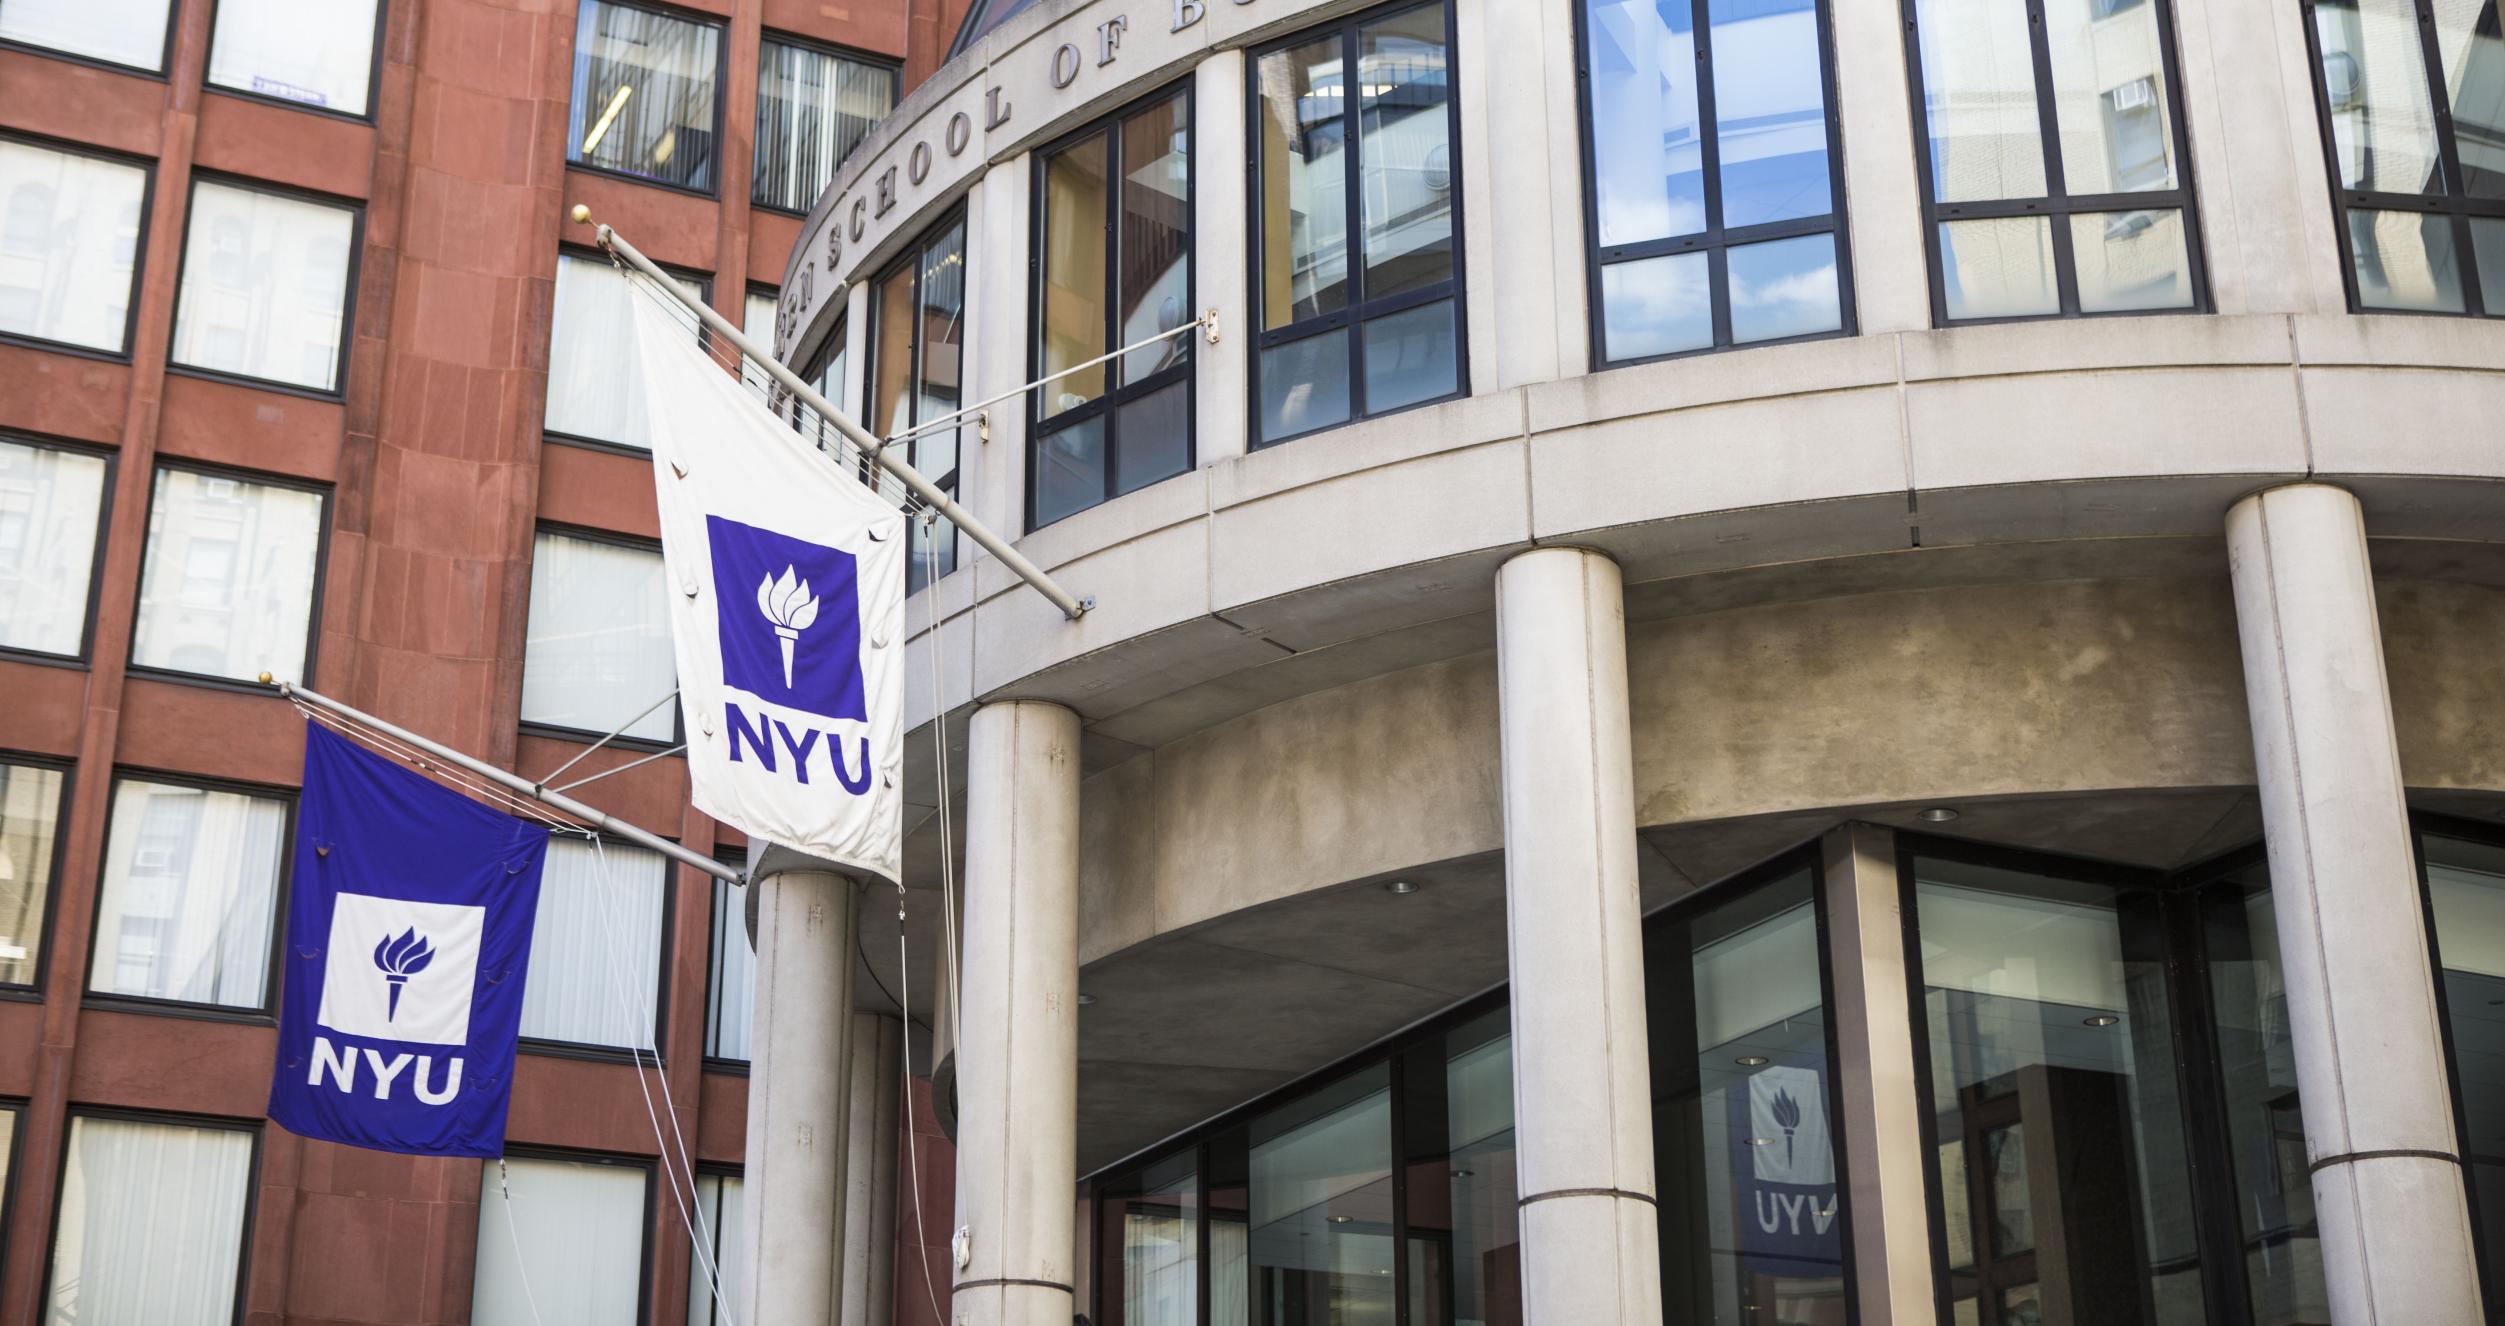 KMC entrance with NYU flags